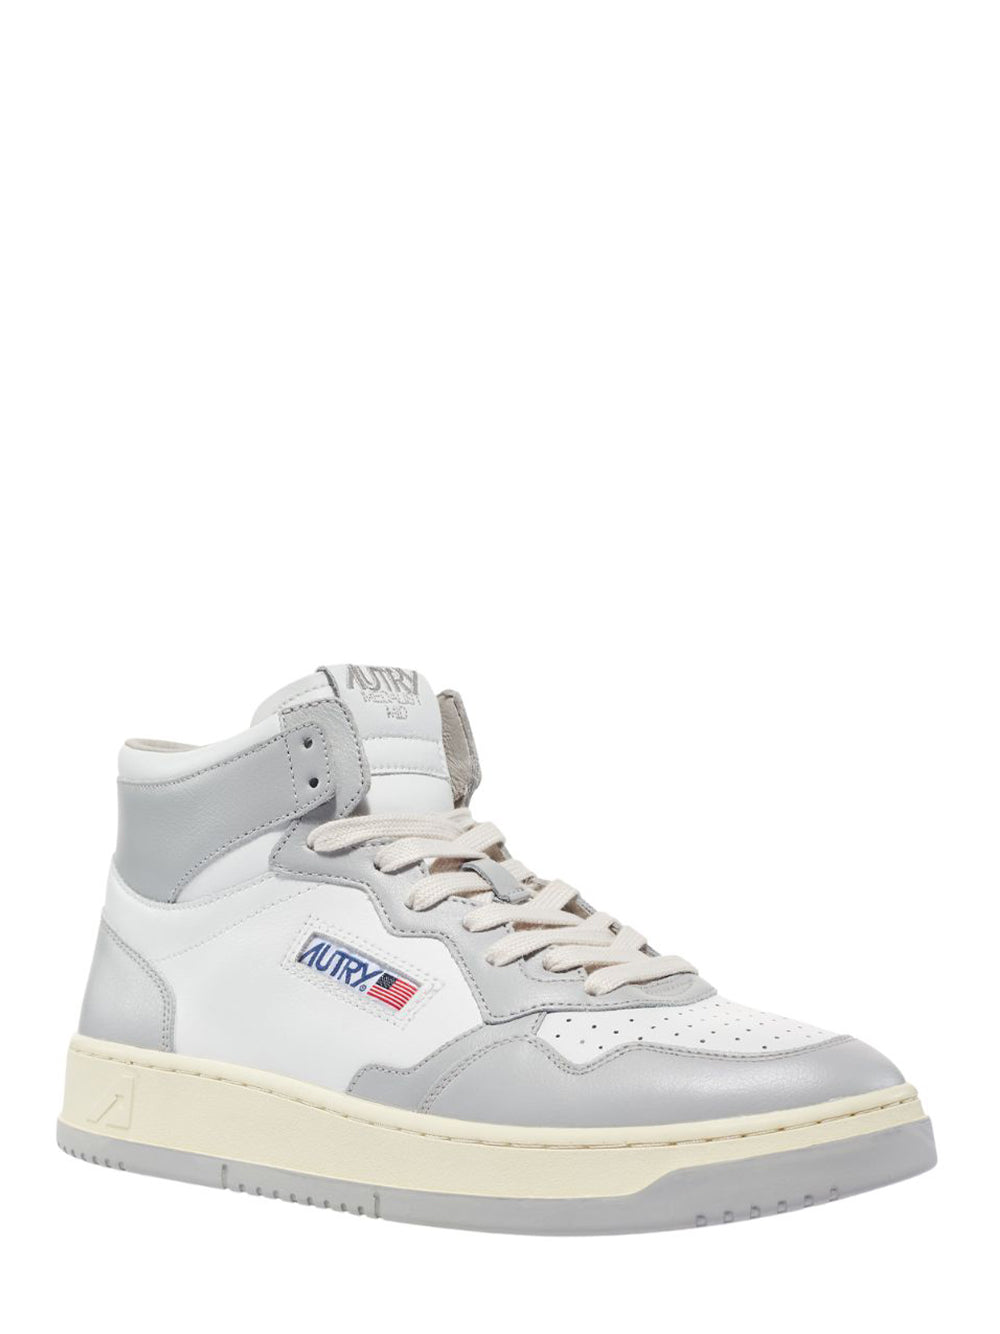 Medalist Mid Sneakers In Two-Tone Leather (White And Vapor) (Women)